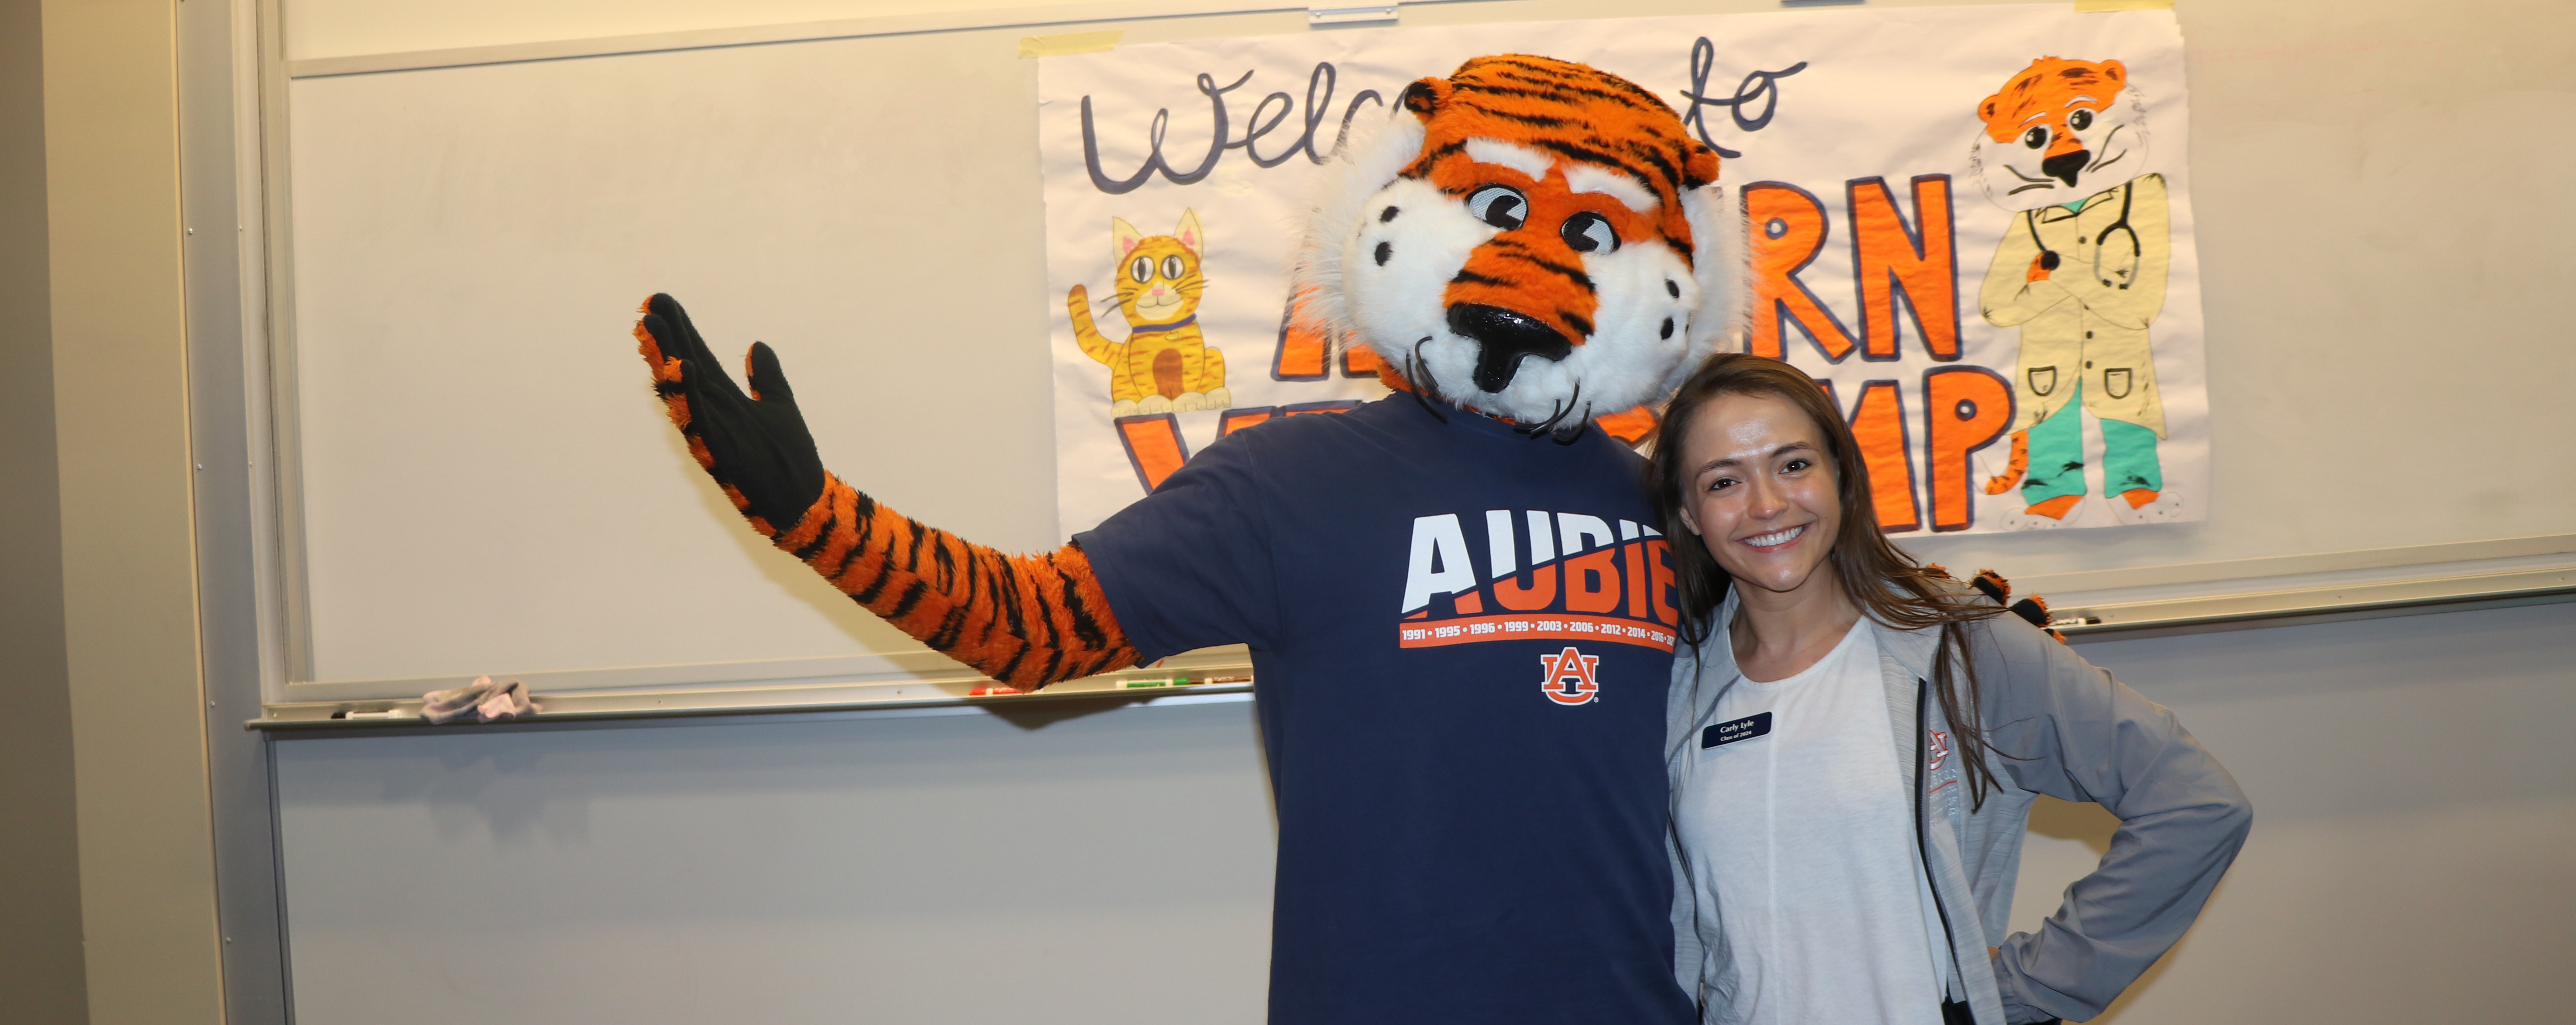 Vet Counselor Carly poses with Aubie the Tiger.